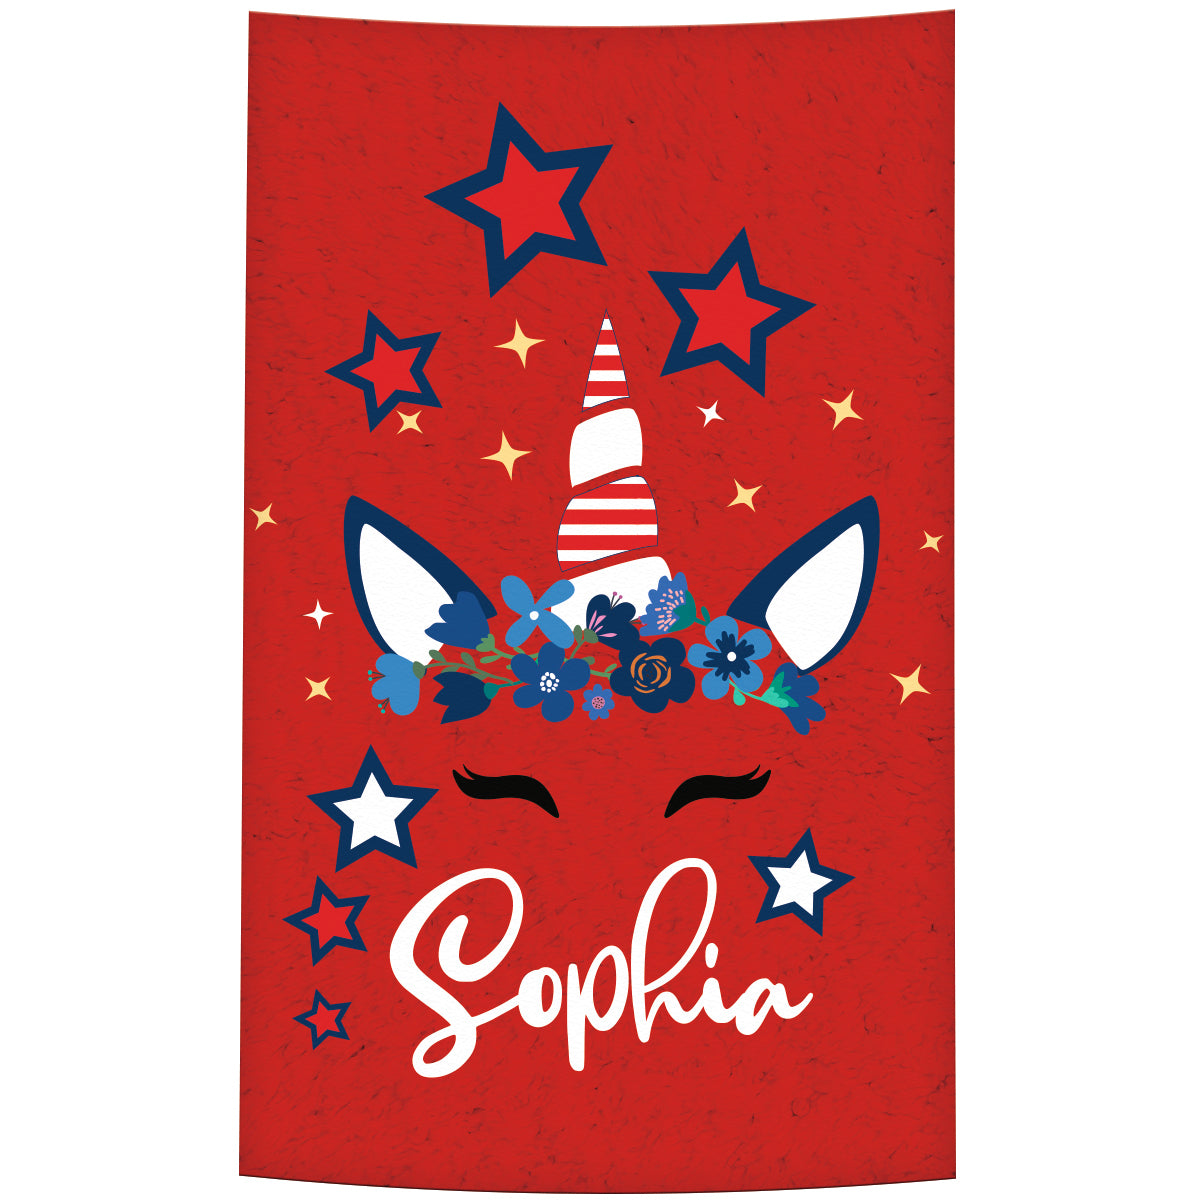 Unicorn Personalized Name Red Towel 51 x 32""